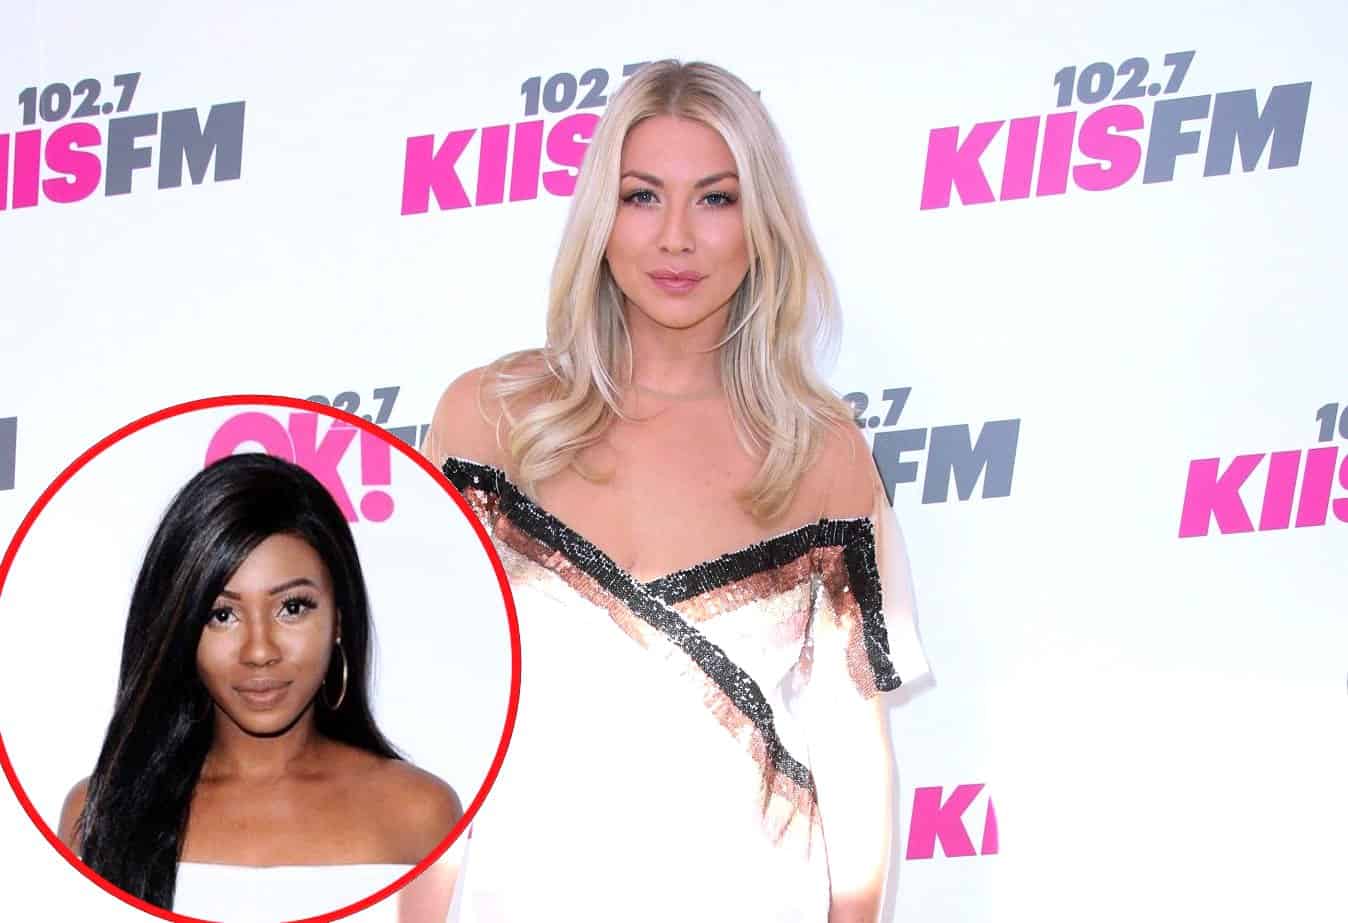 Stassi Schroeder Takes Time Off Podcast to "Listen" and "Learn" Amid Backlash Over Treatment of Former Costar Faith Stowers as the Vanderpump Rules Star Helps Promote Black-Owned Businesses